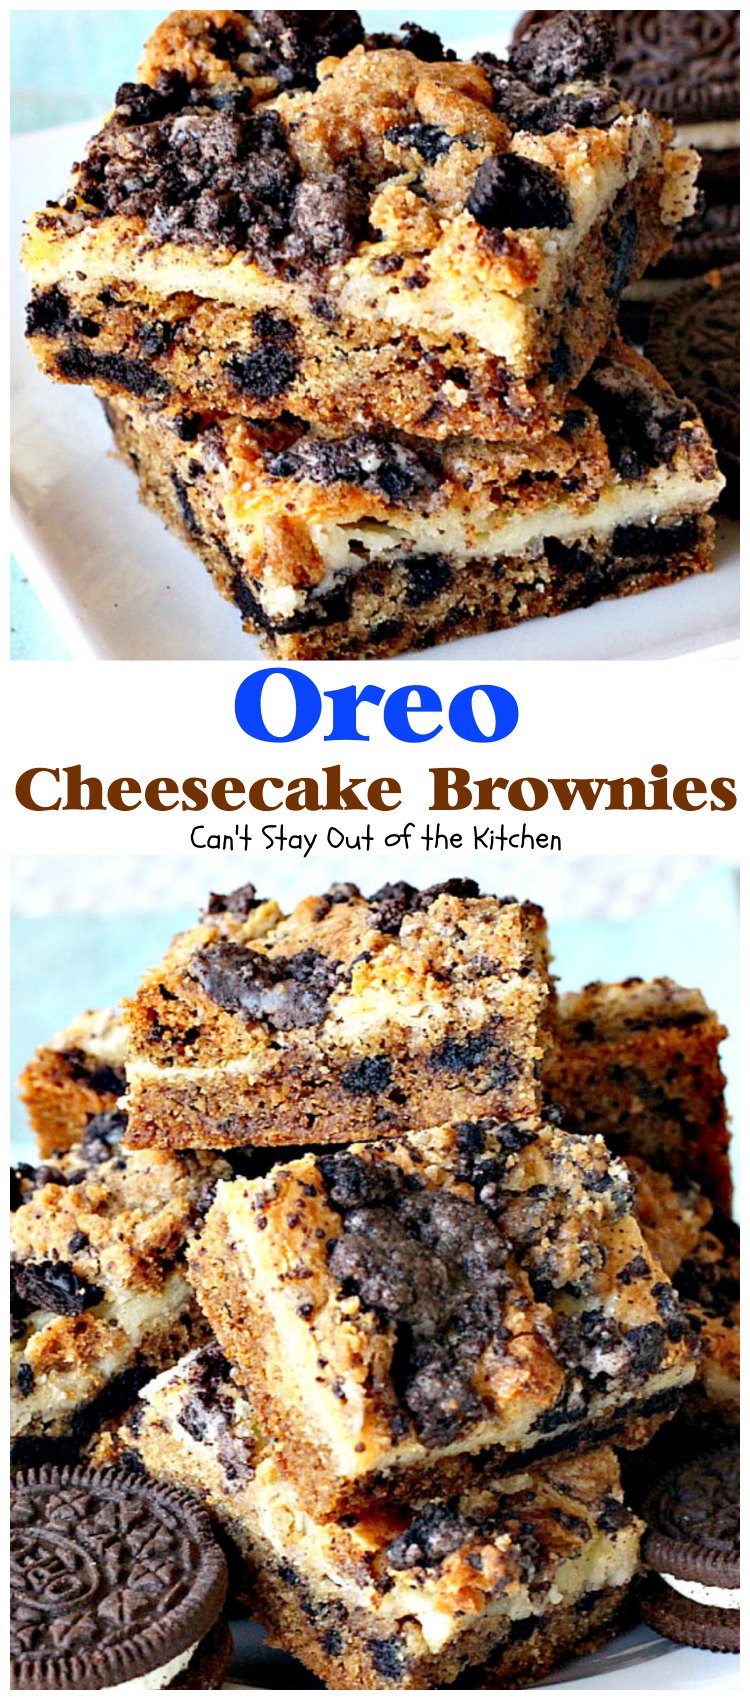 Oreo Cheesecake Brownies | Can't Stay Out of the KitchenOreo Cheesecake Brownies | Can't Stay Out of the Kitchen